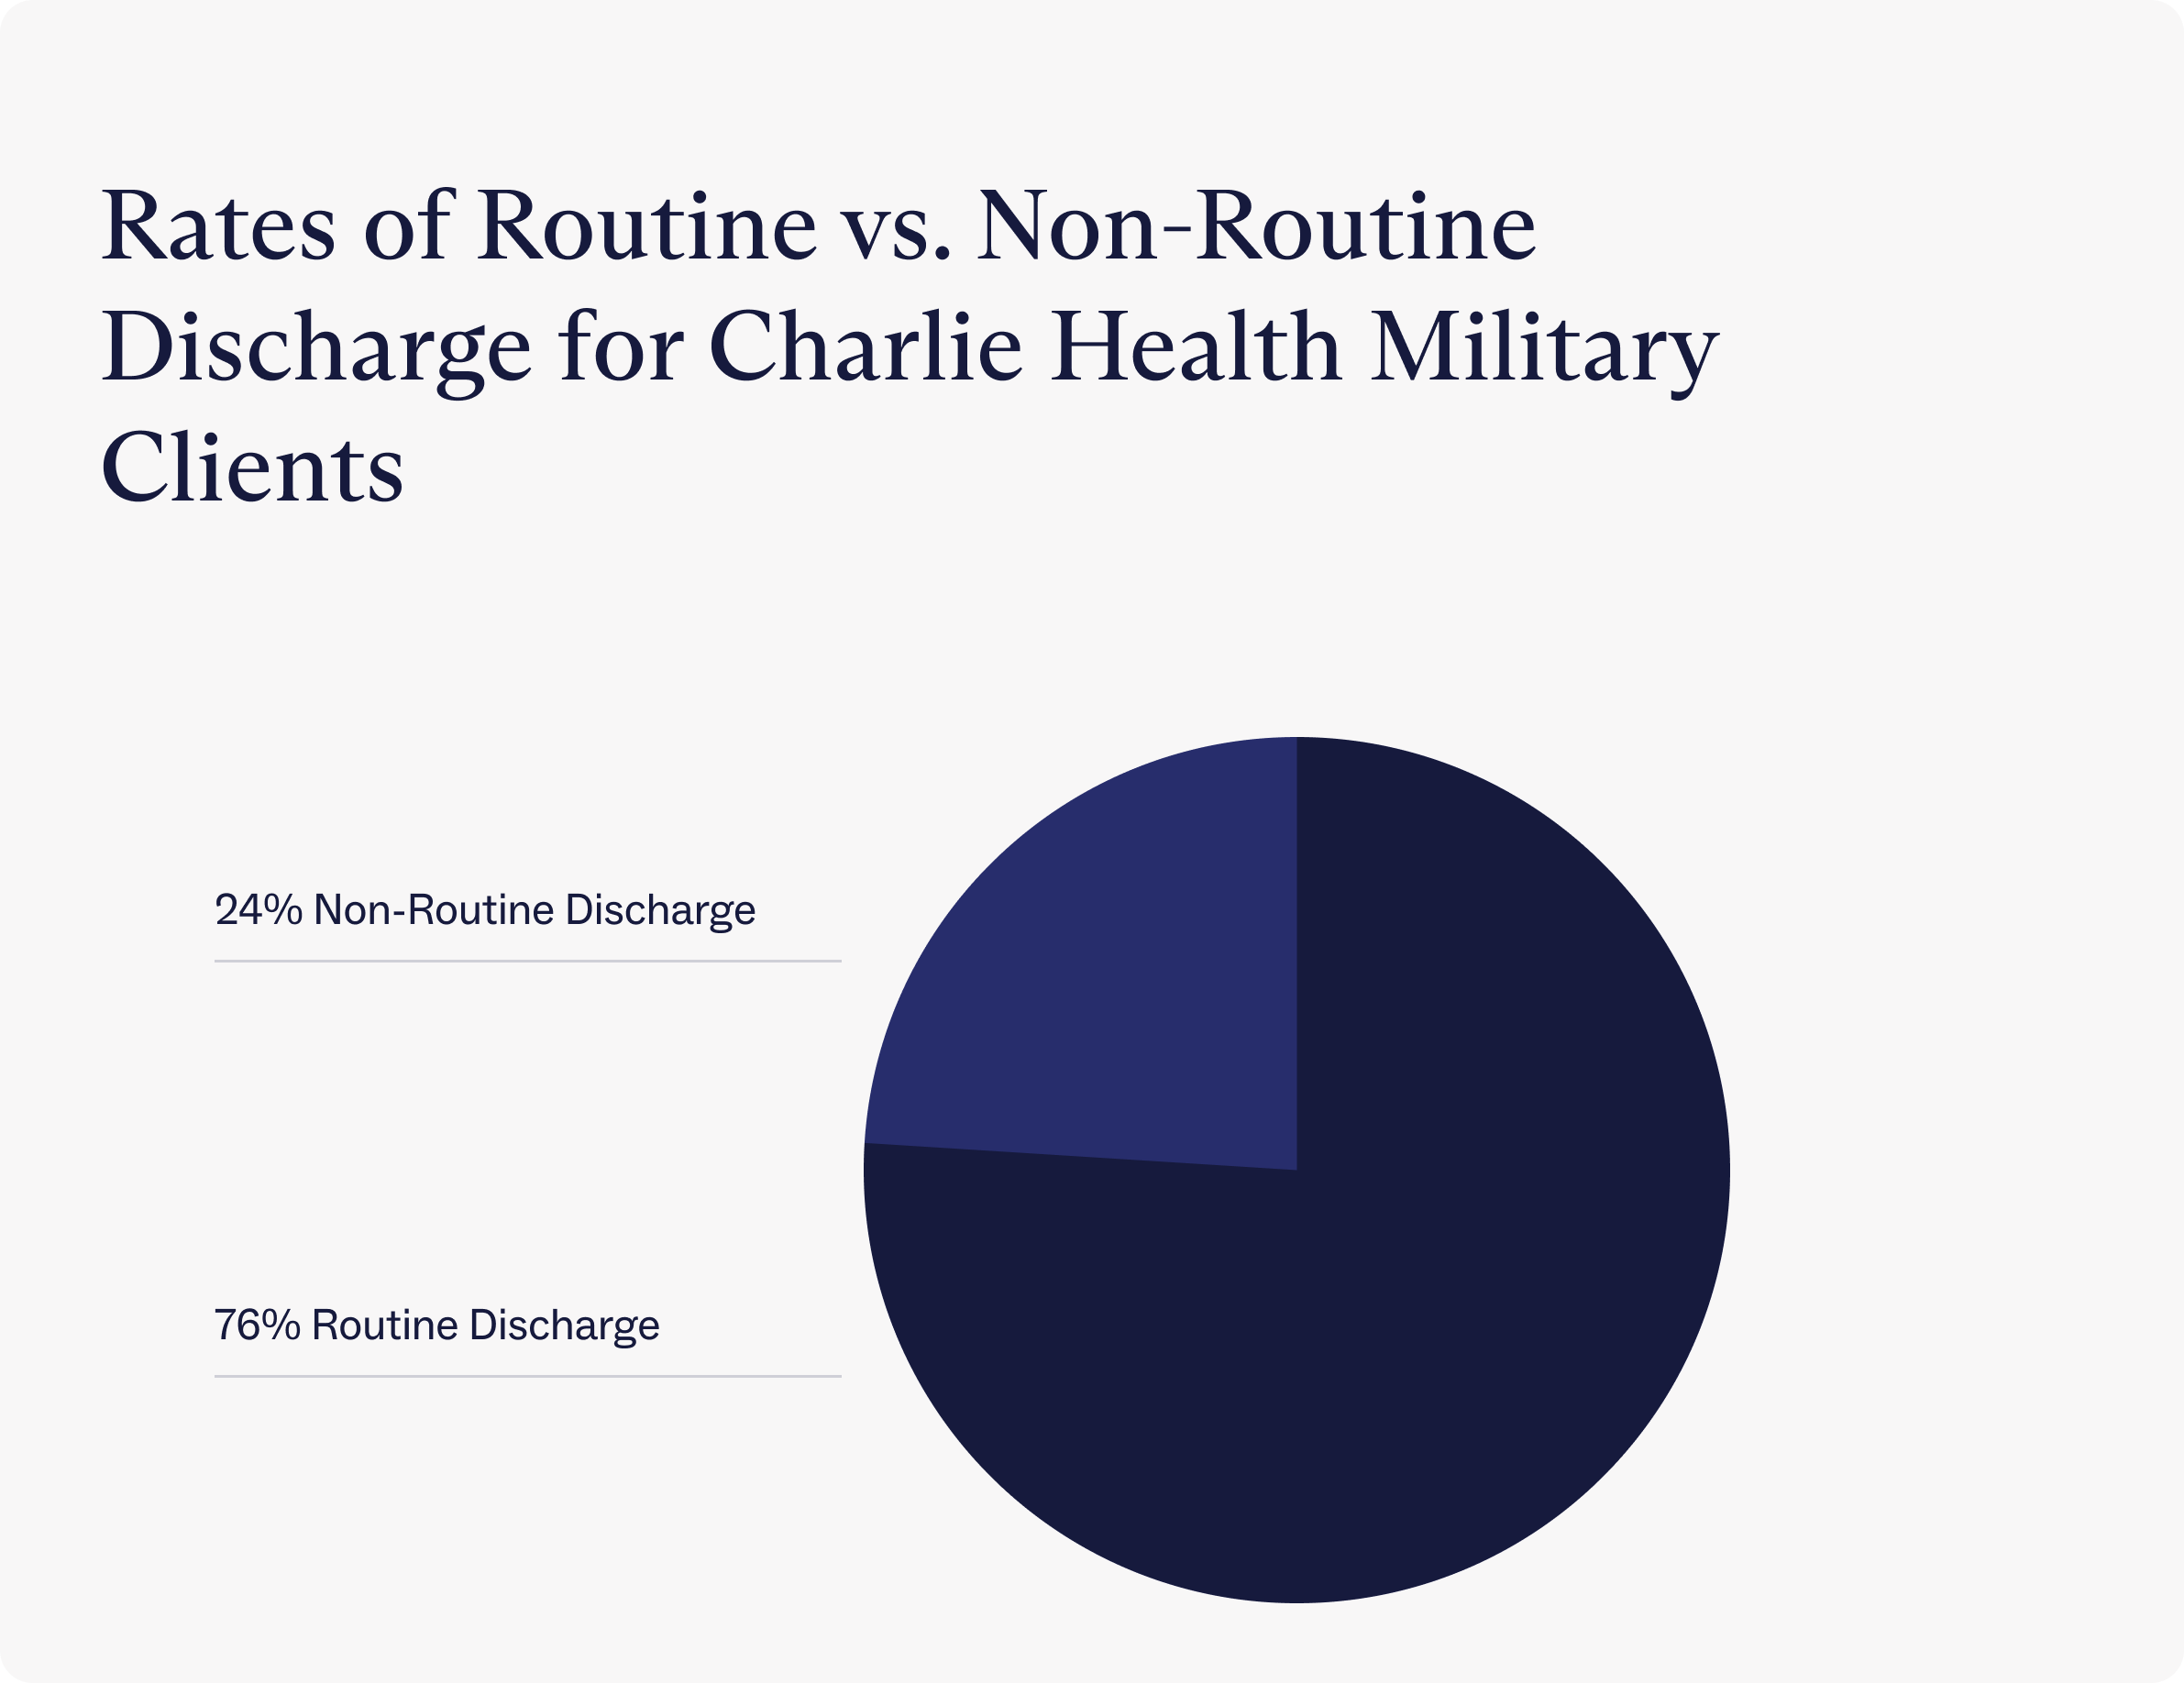 Rates of routine vs non-routine discharge for Charlie Health military clients